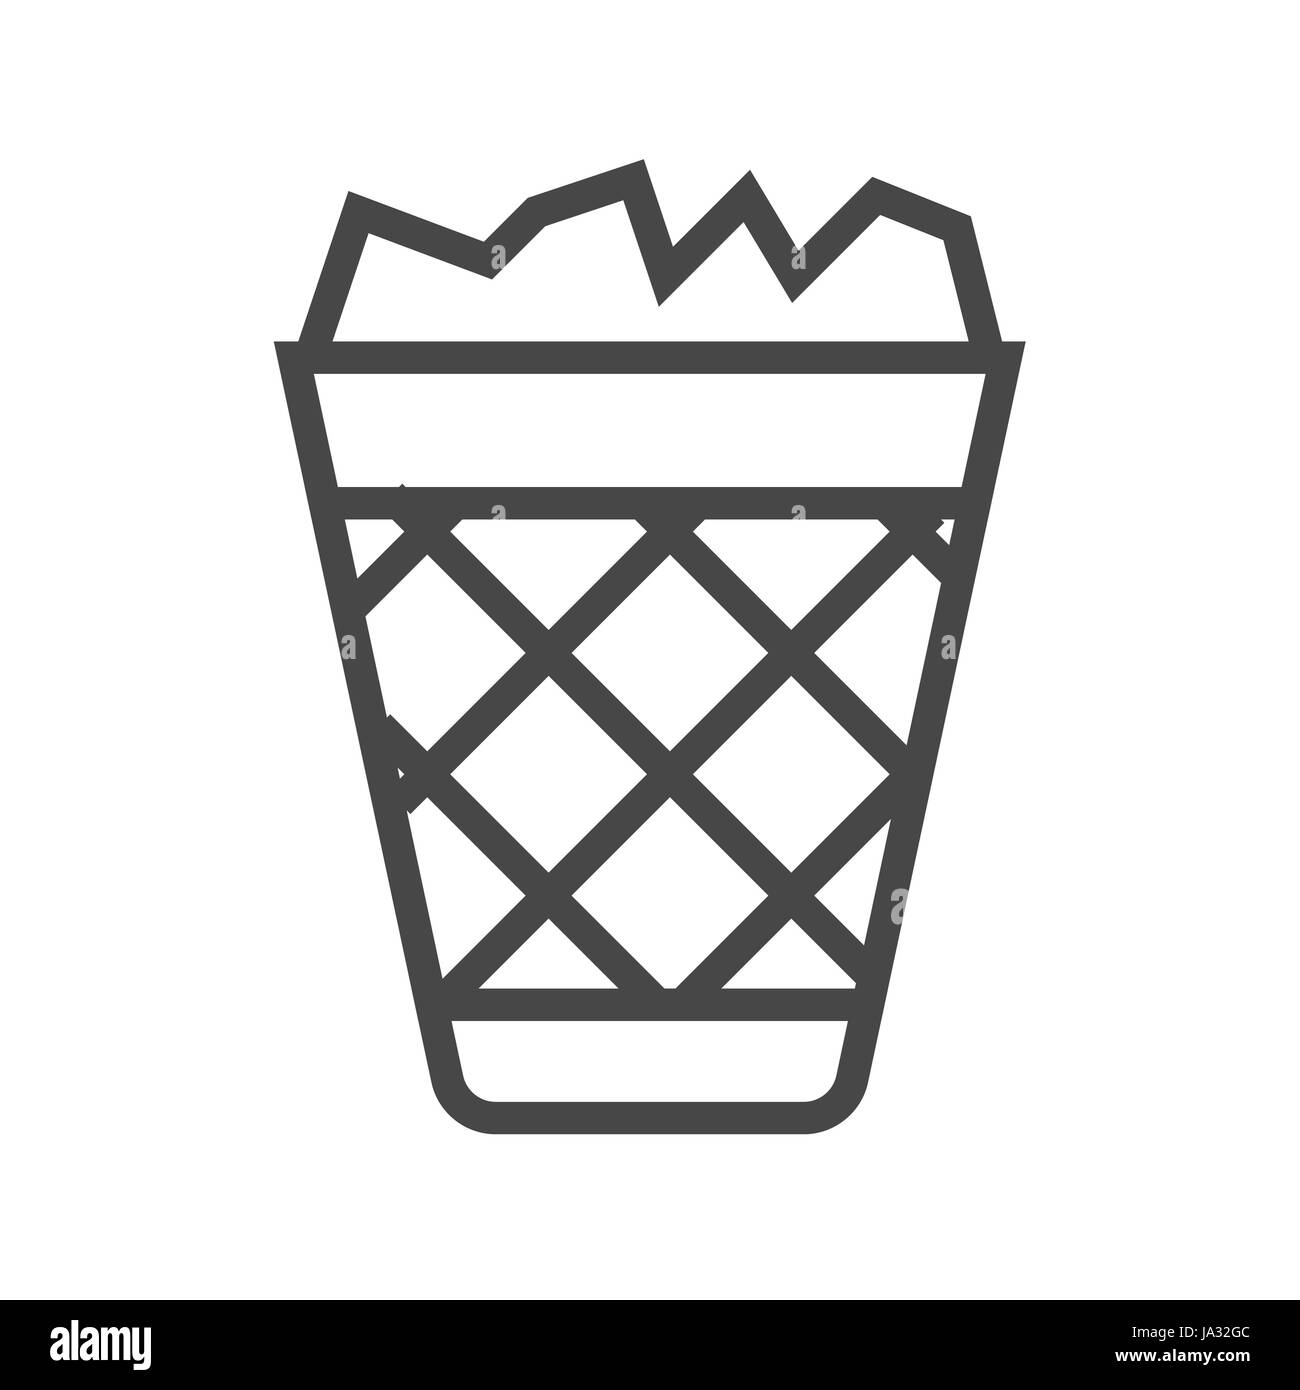 Trash Bin Thin Line Vector Icon. Flat icon isolated on the white background. Editable EPS file. Vector illustration. Stock Vector